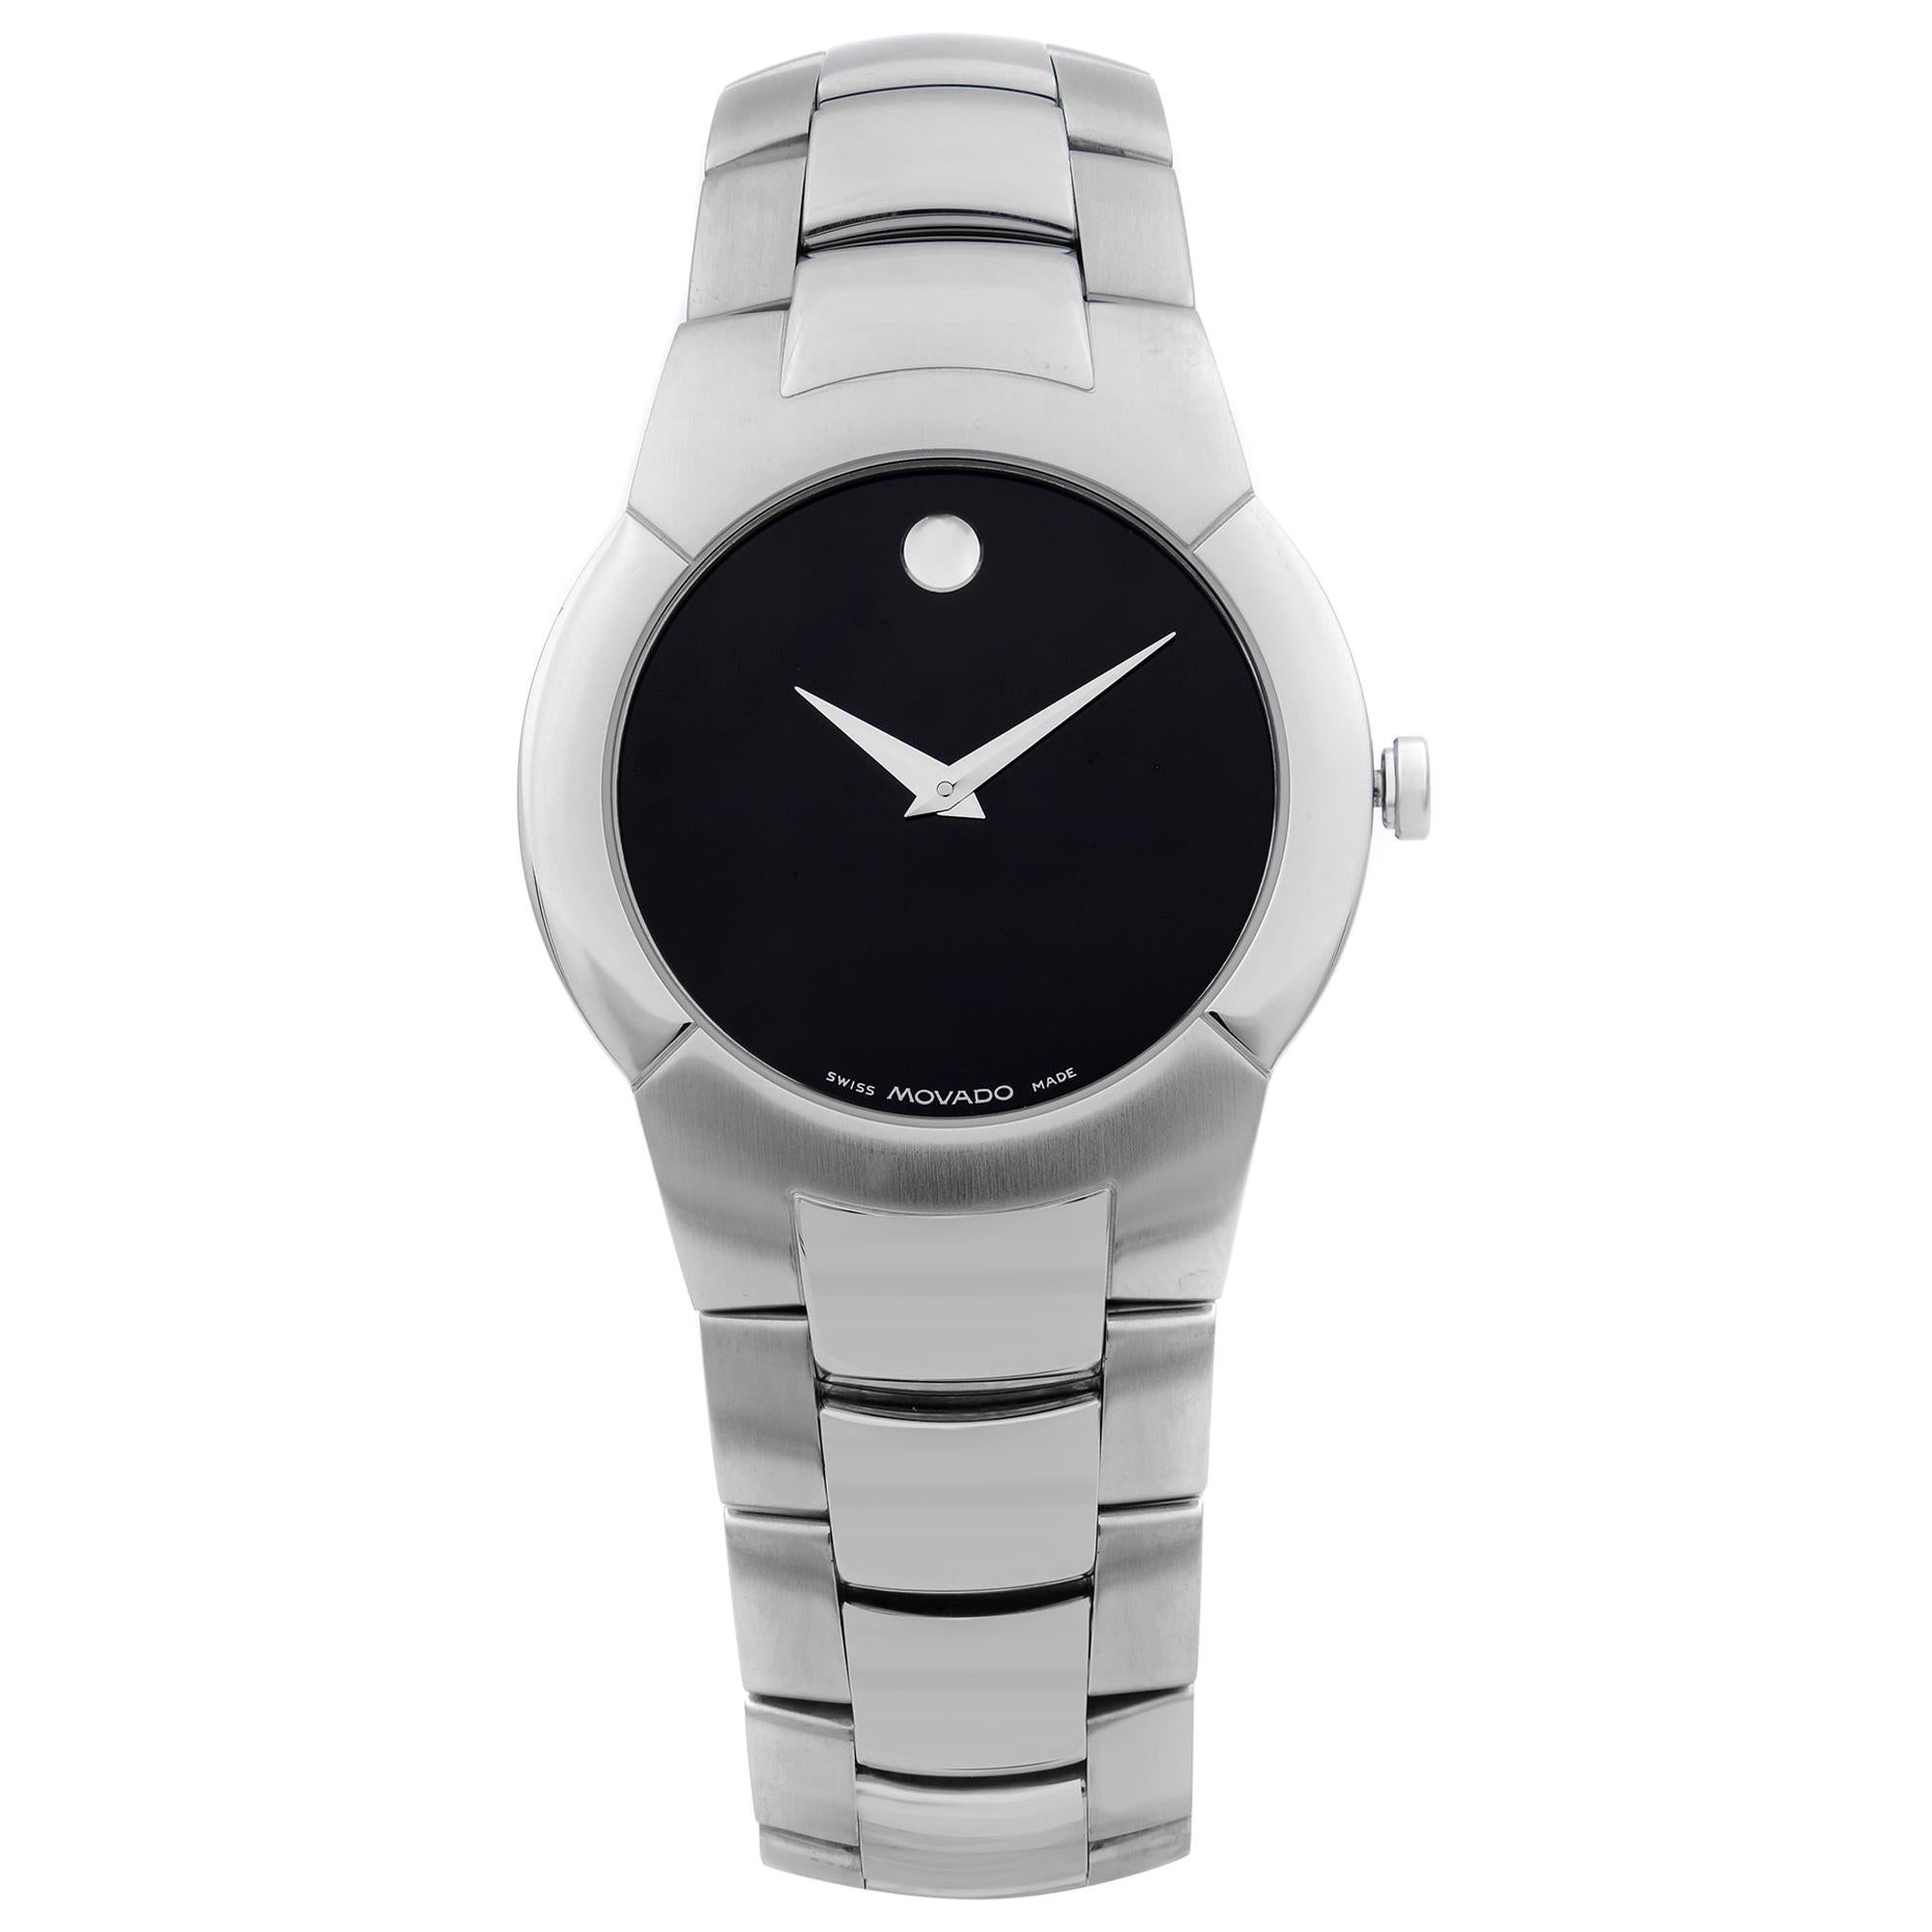 movado 1853, Black Monto g1 museum Museum movado 1stDibs 84 Quartz Stainless movado steel Movado Men\'s | stainless 1897 84 at museum G1 watch, Steel Watch Dial